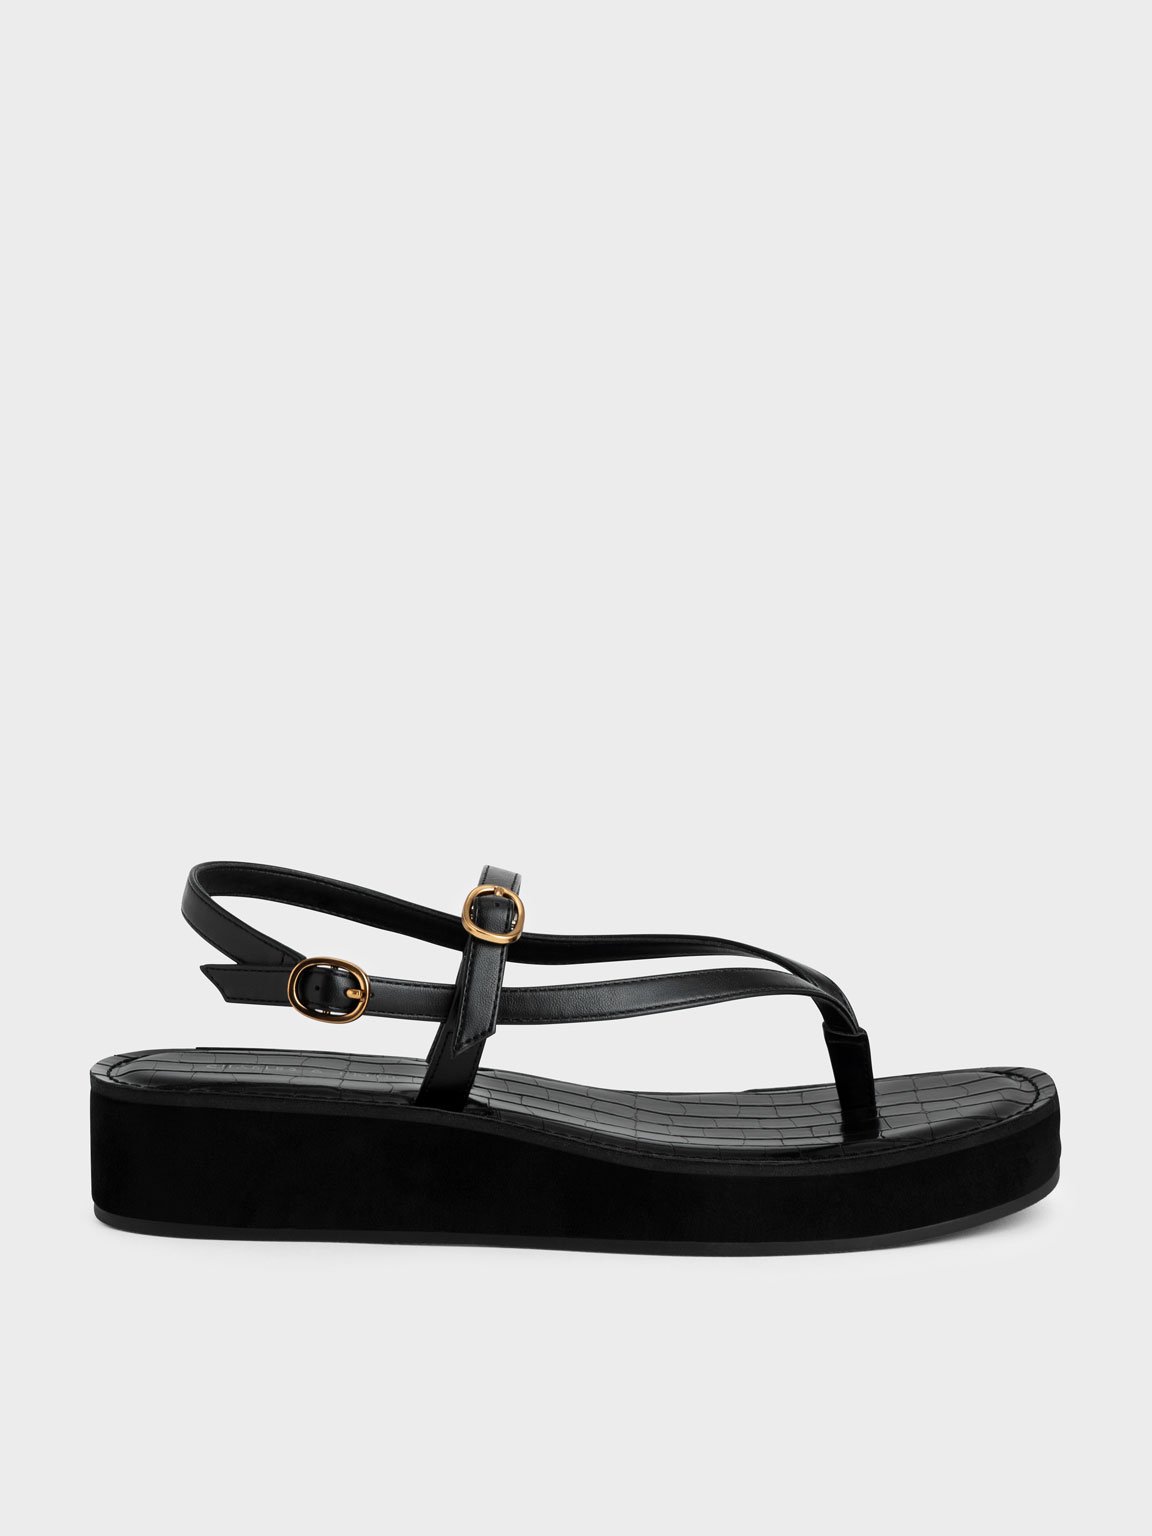 LV SANDAL FIRST COPY INDIA ONLINE